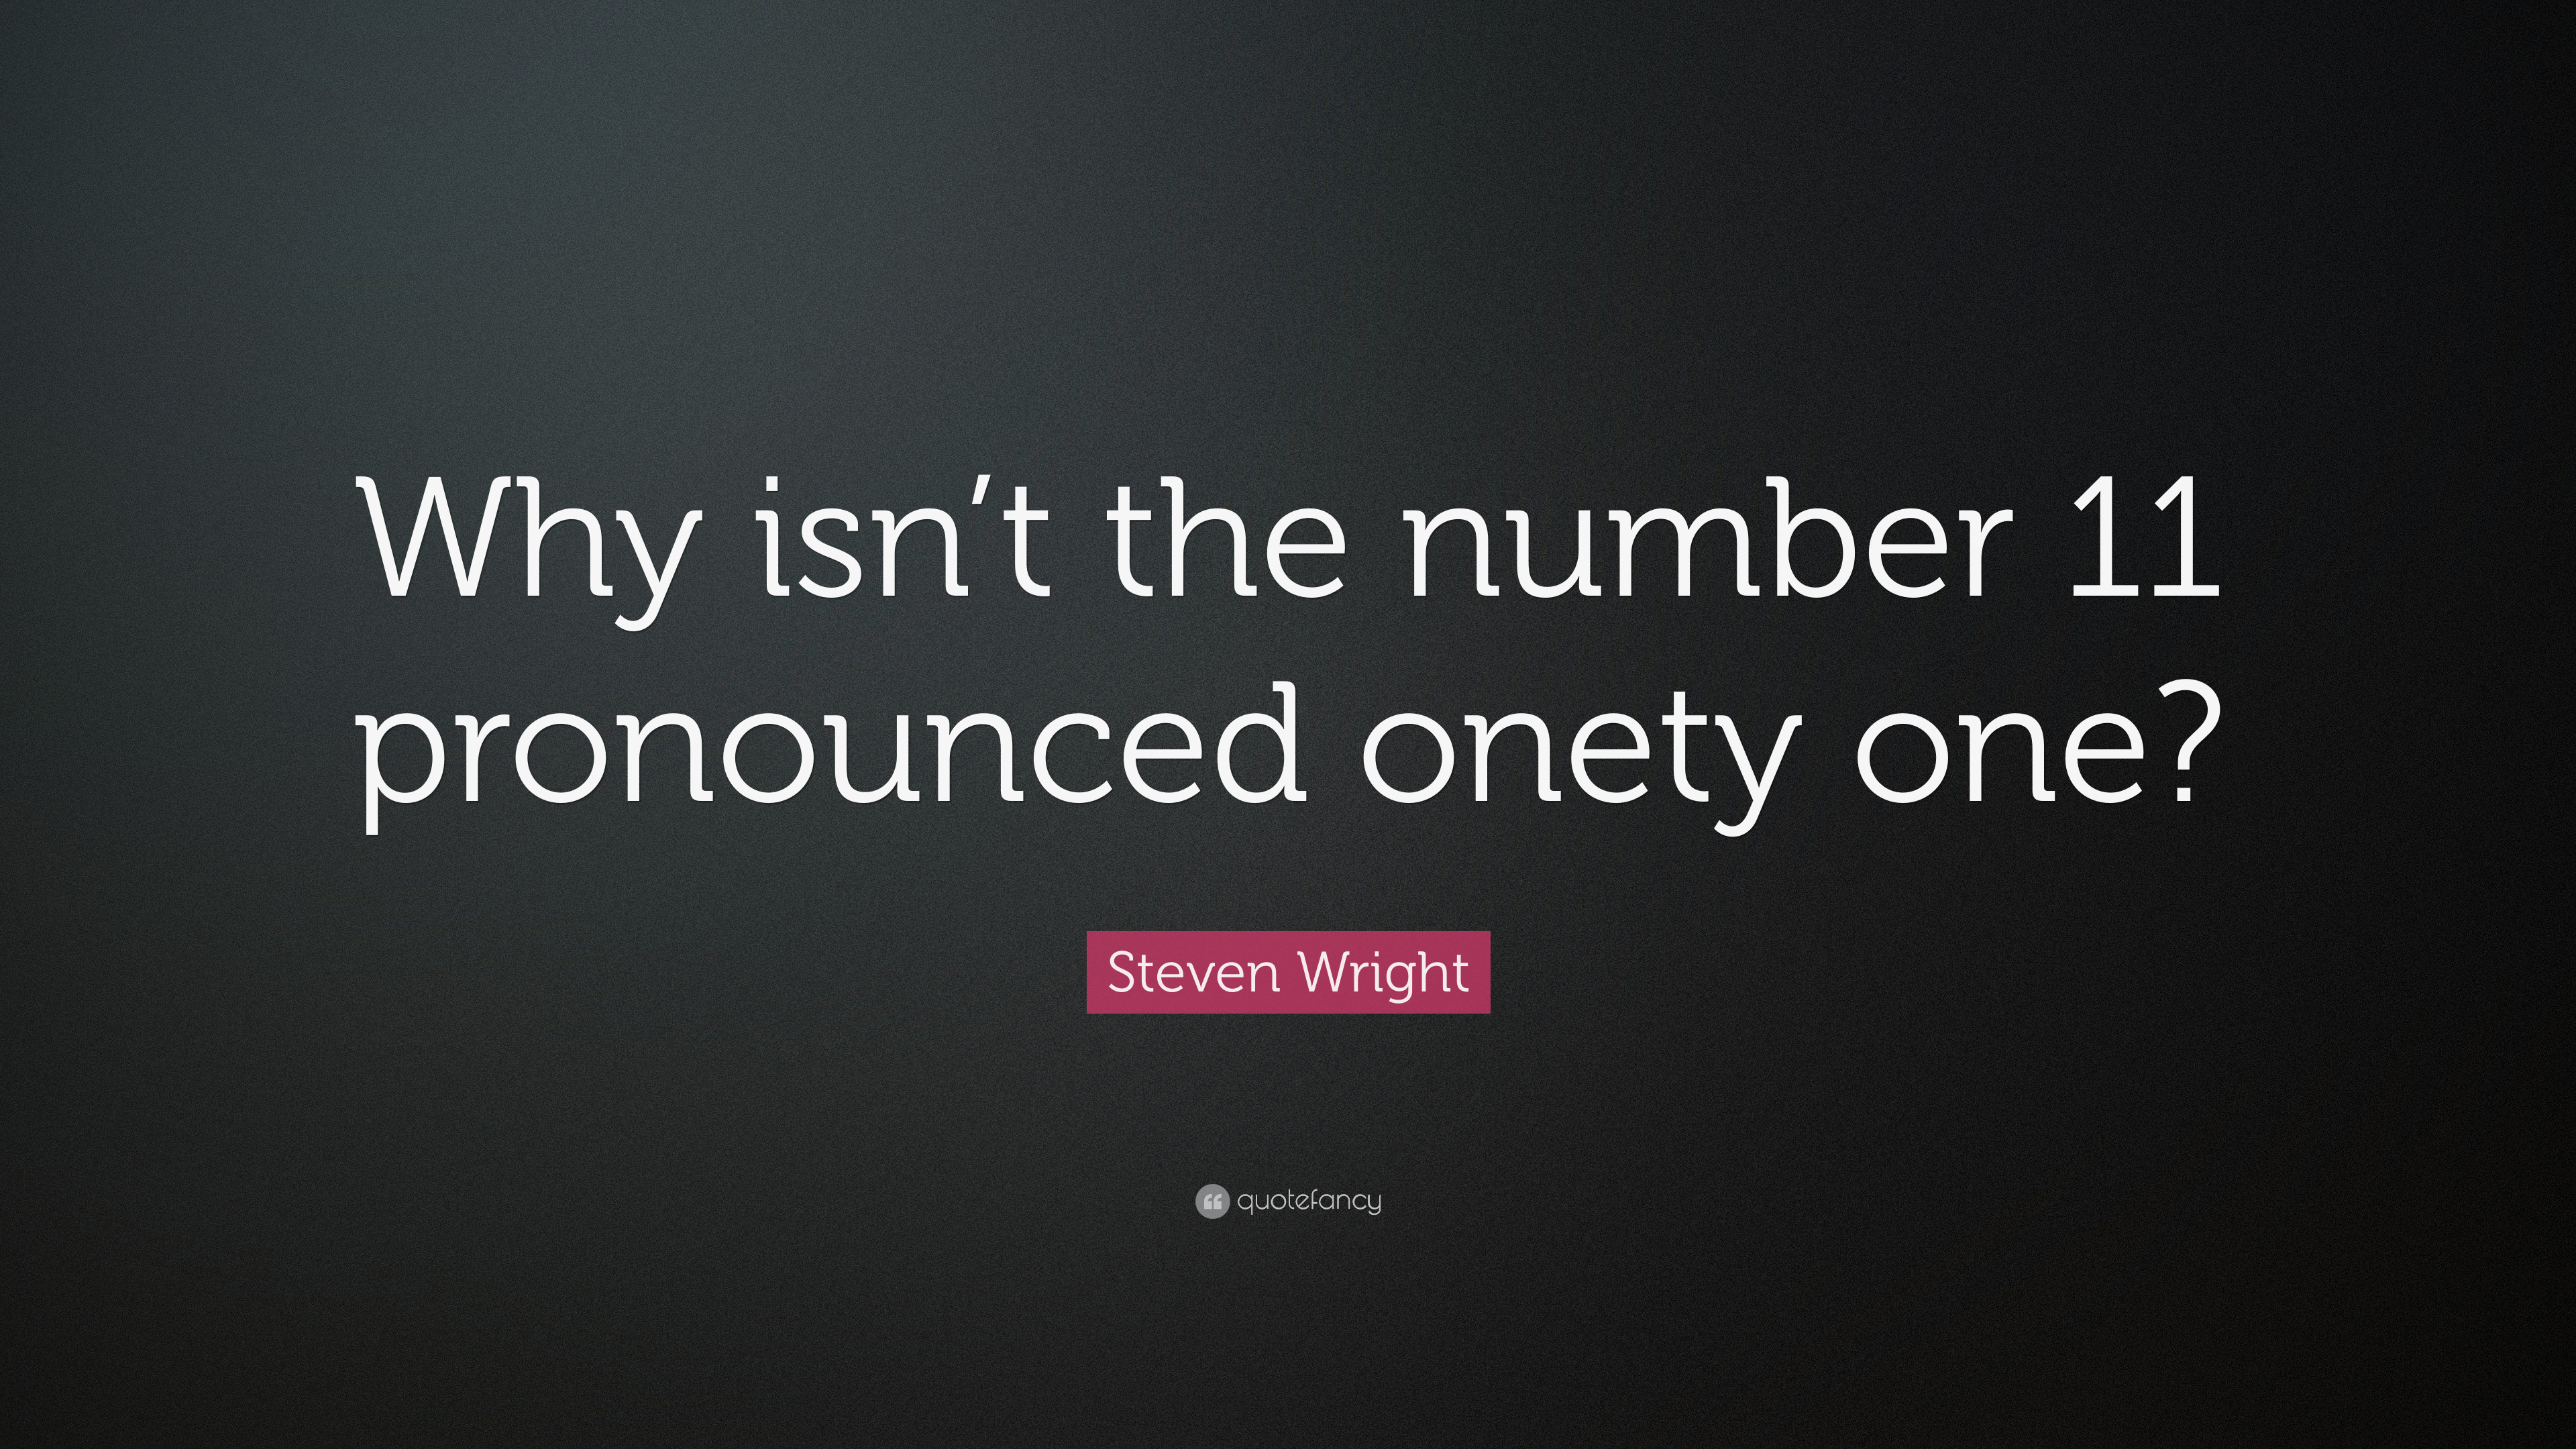 3840x2160 Steven Wright Quote: “Why isn't the number 11 pronounced onety one?